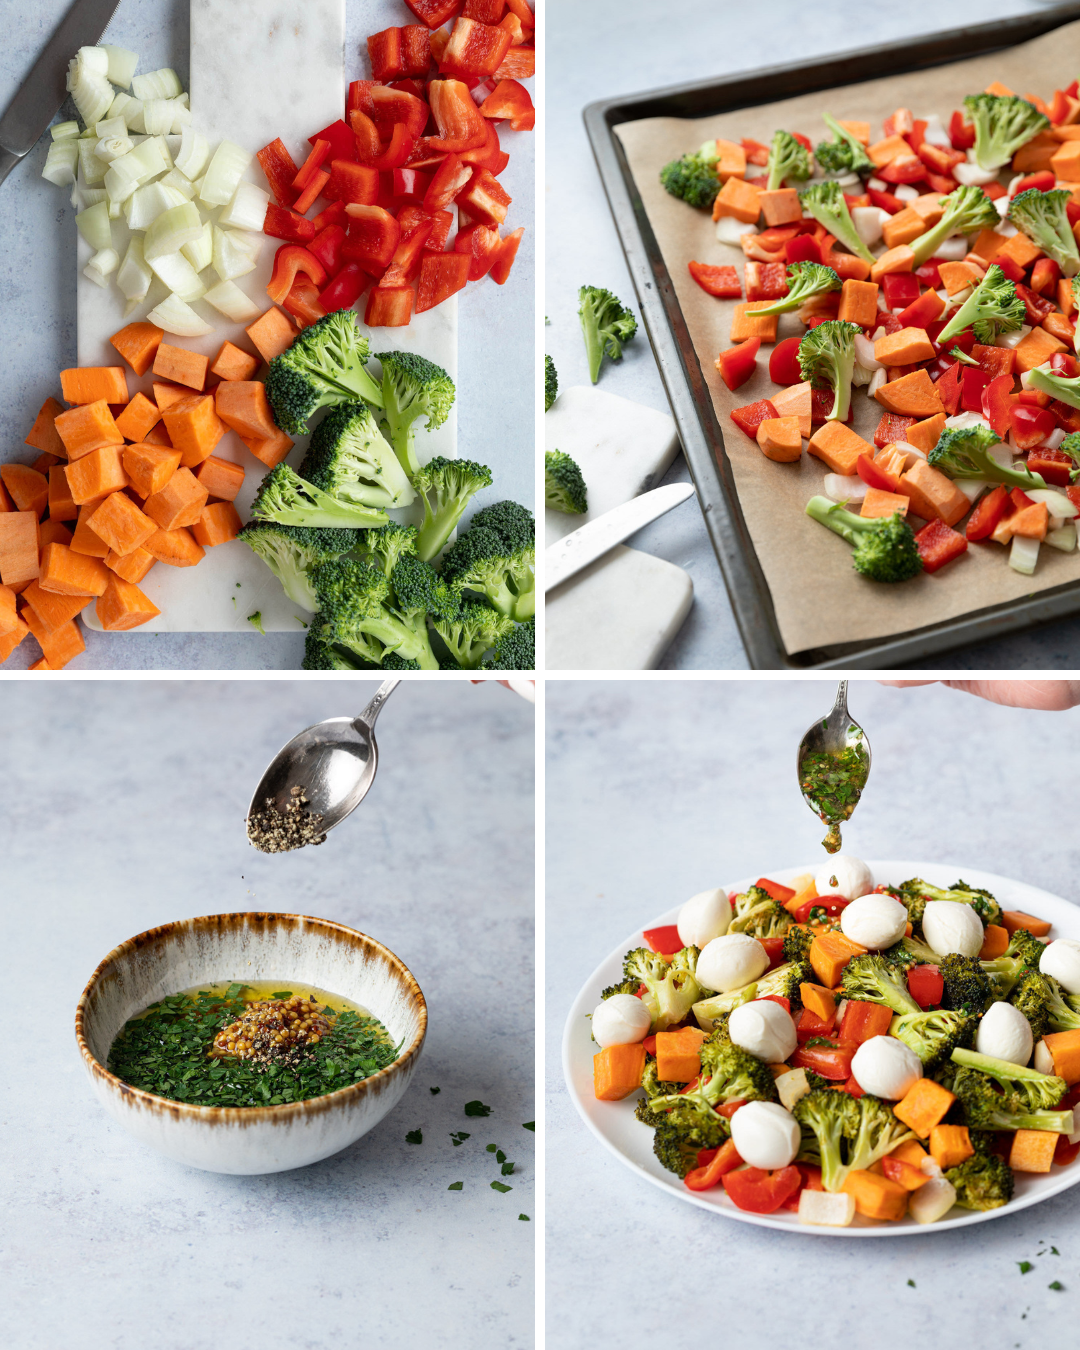 Step by step assembly of roasted vegetable salad